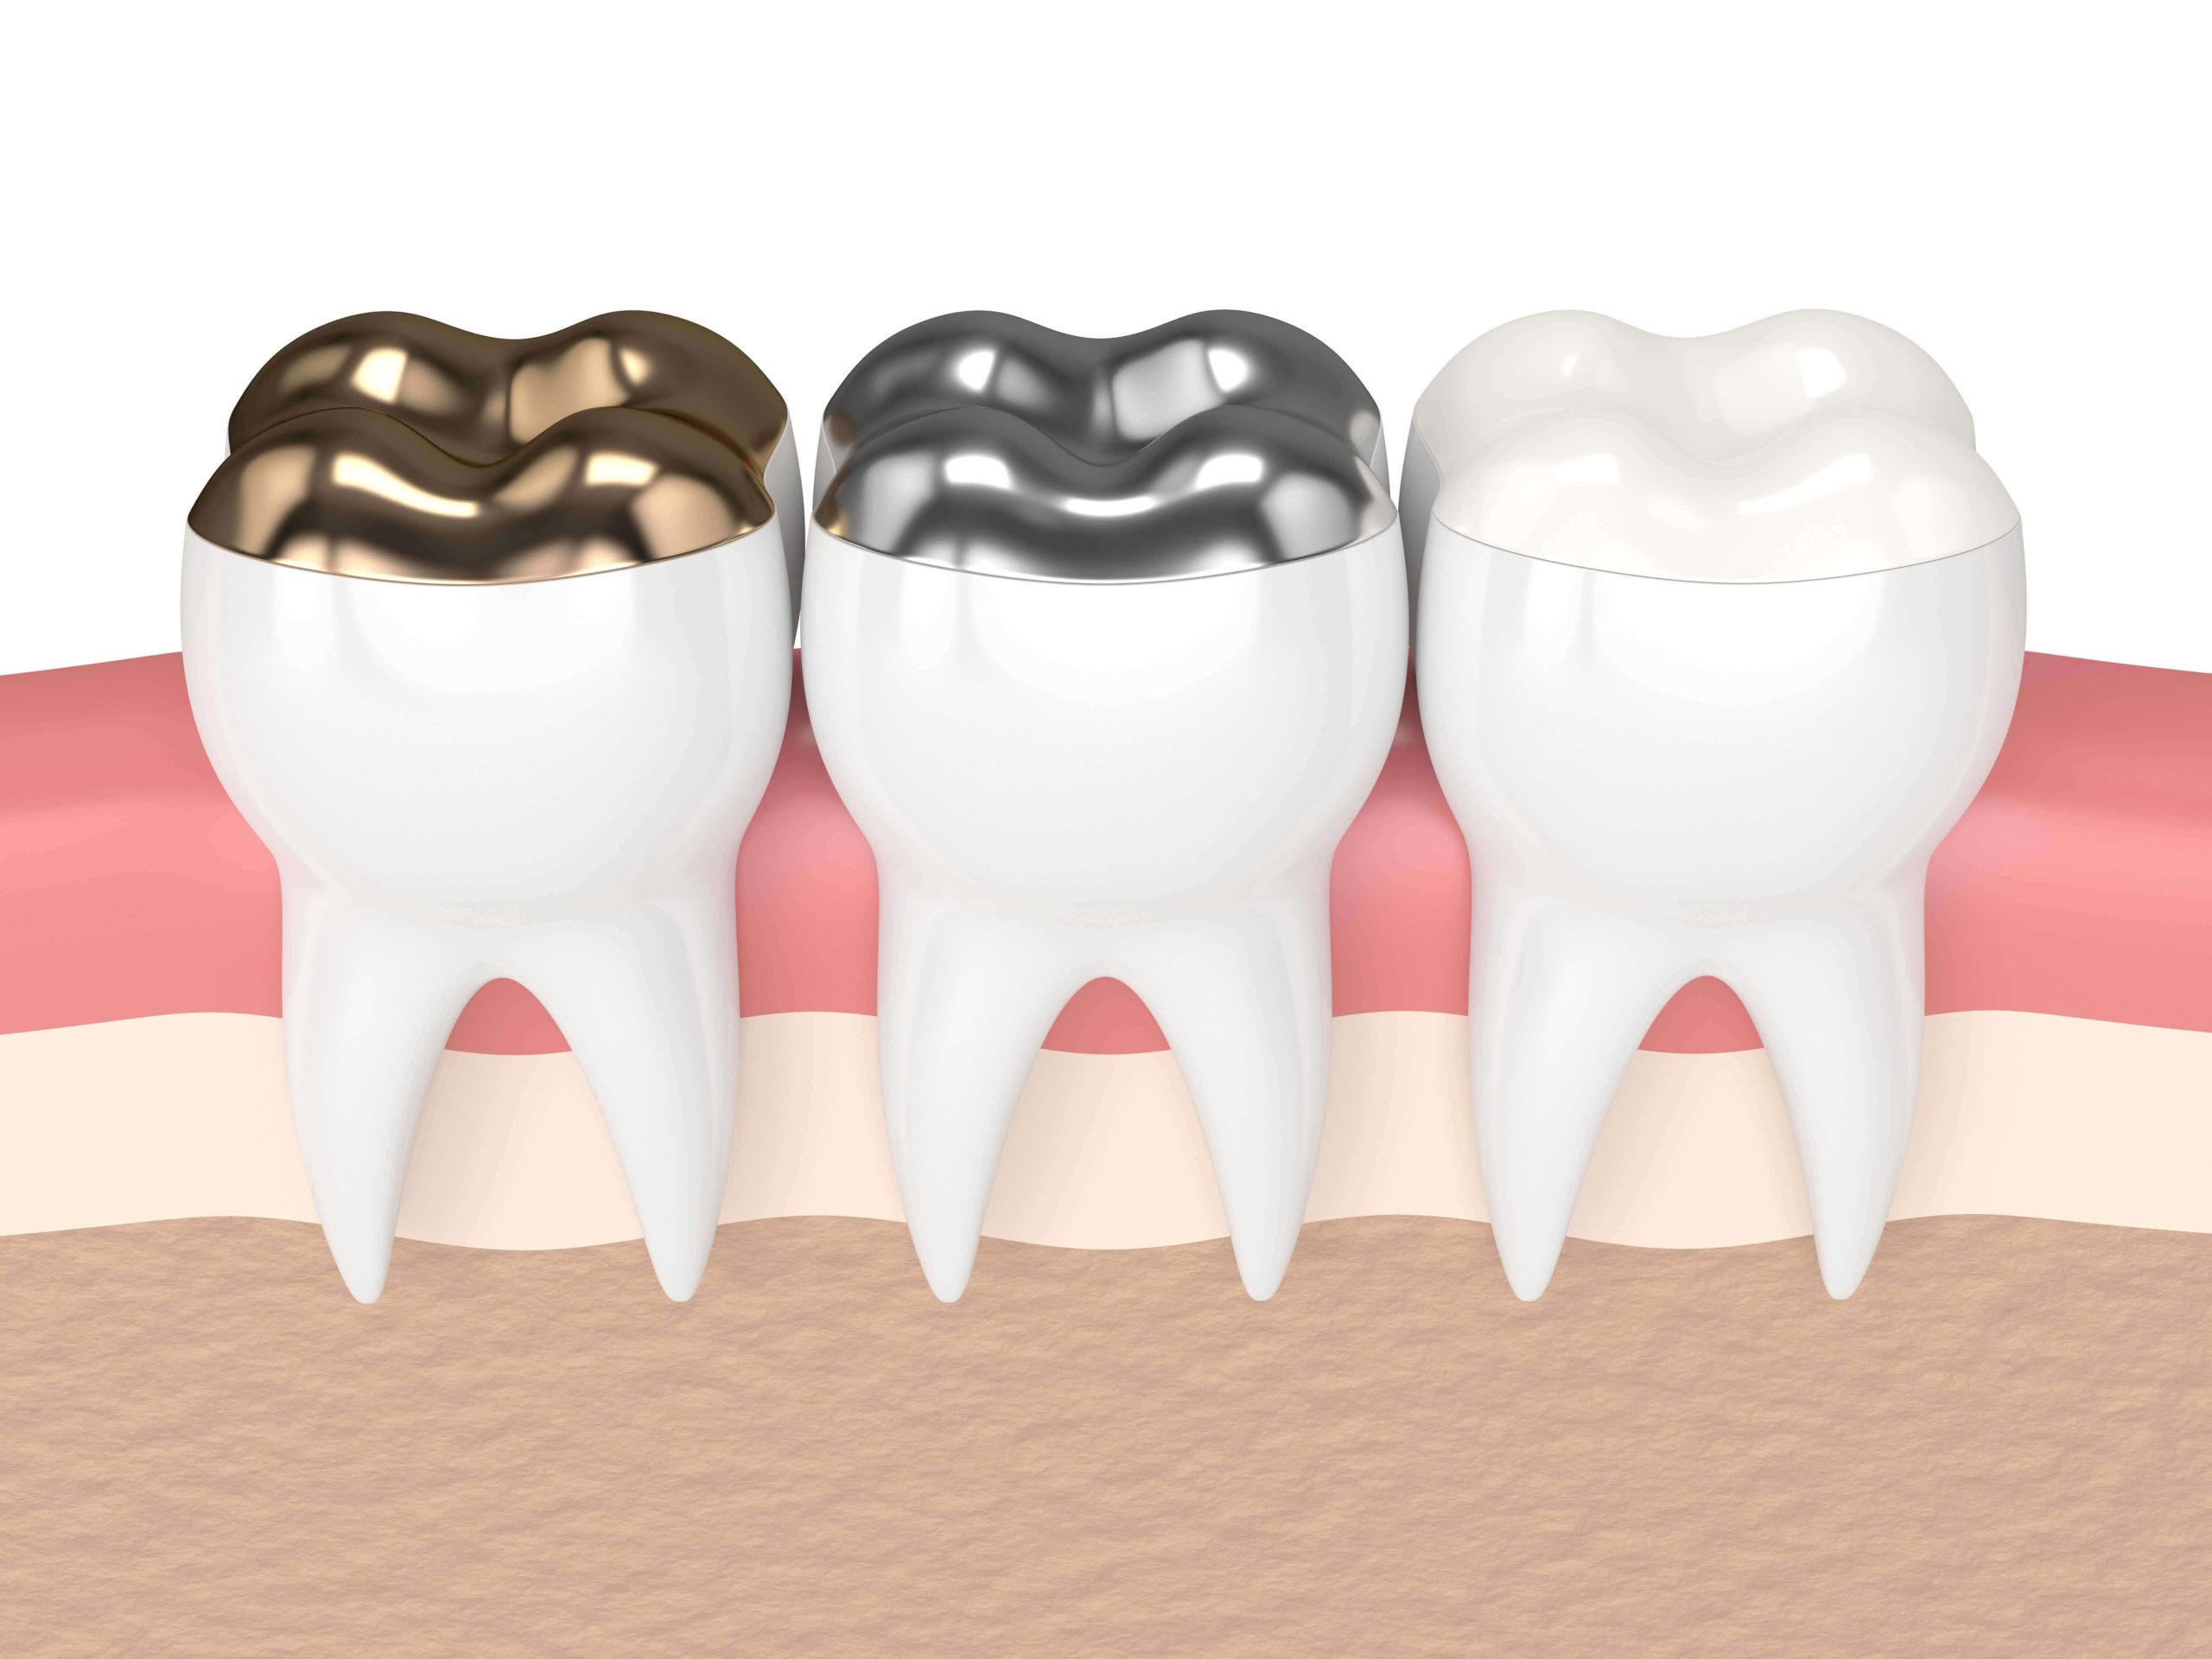 Silver and gold fillings on a 3D rendering of some teeth.